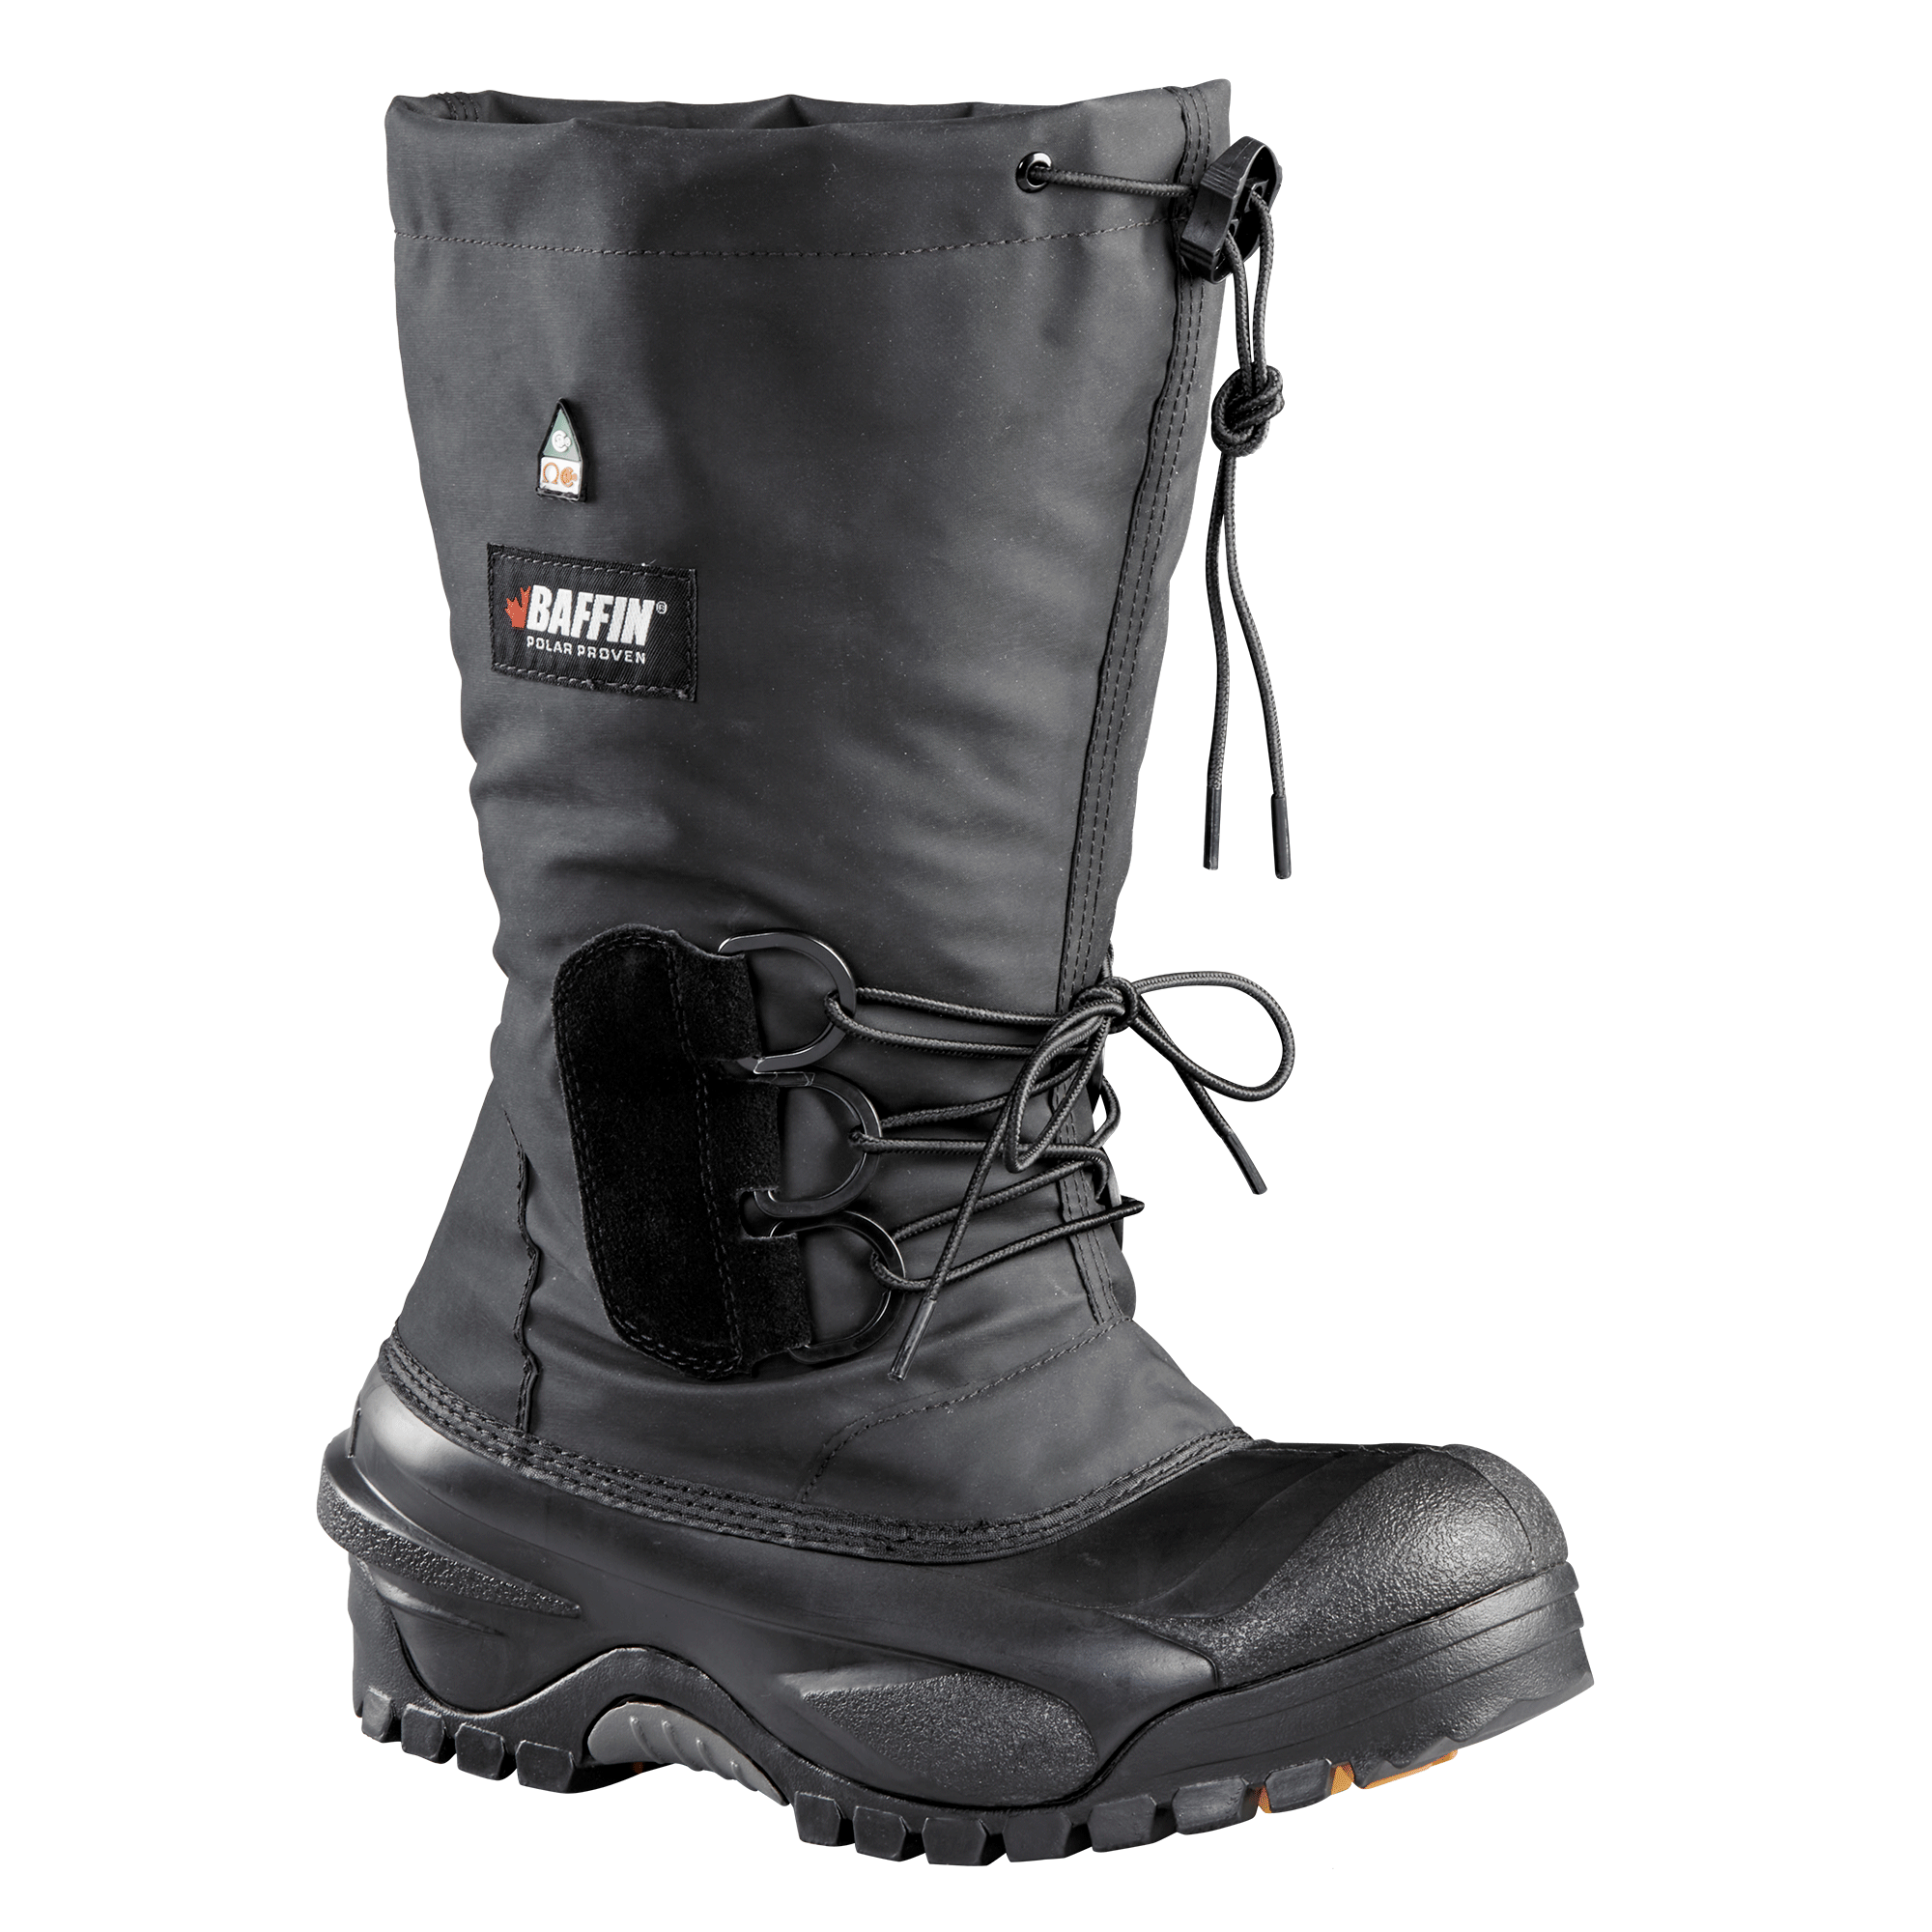 FORT MAC (SAFETY TOE & PLATE)  Men's Boot – Baffin - Born in the North '79